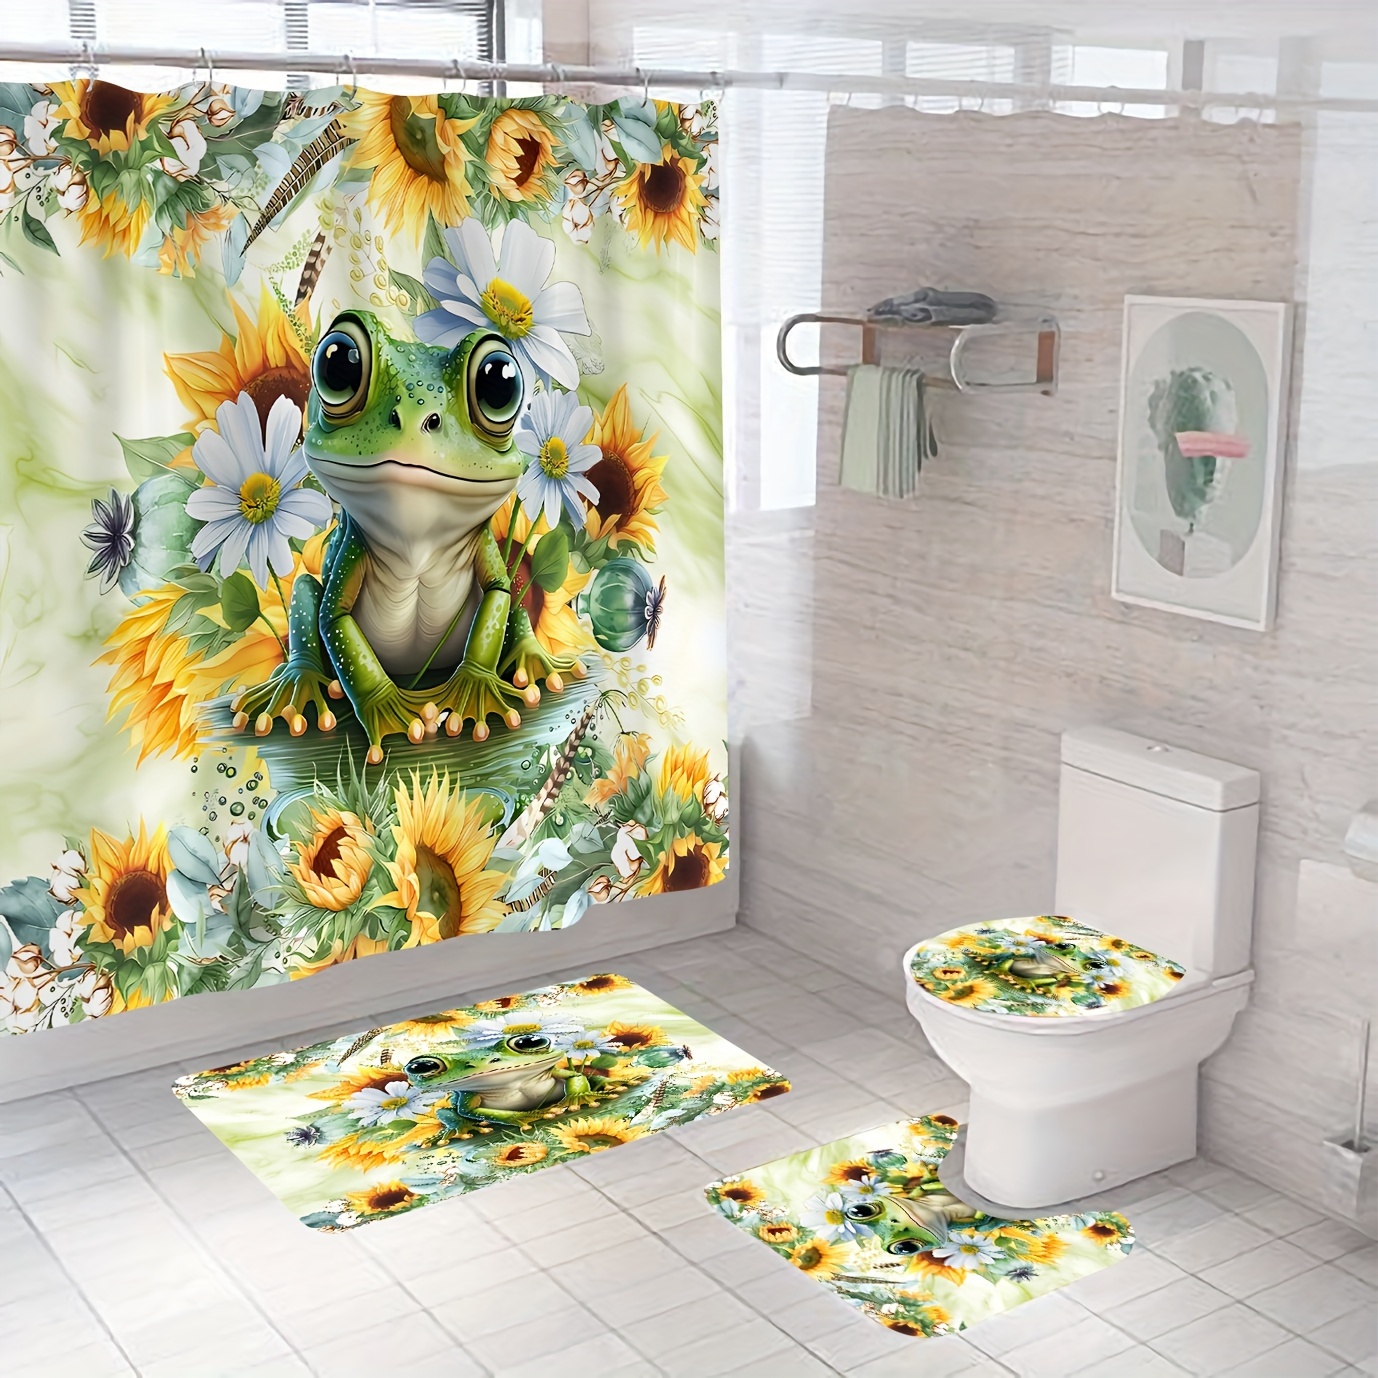 It's a frog Shower Curtain